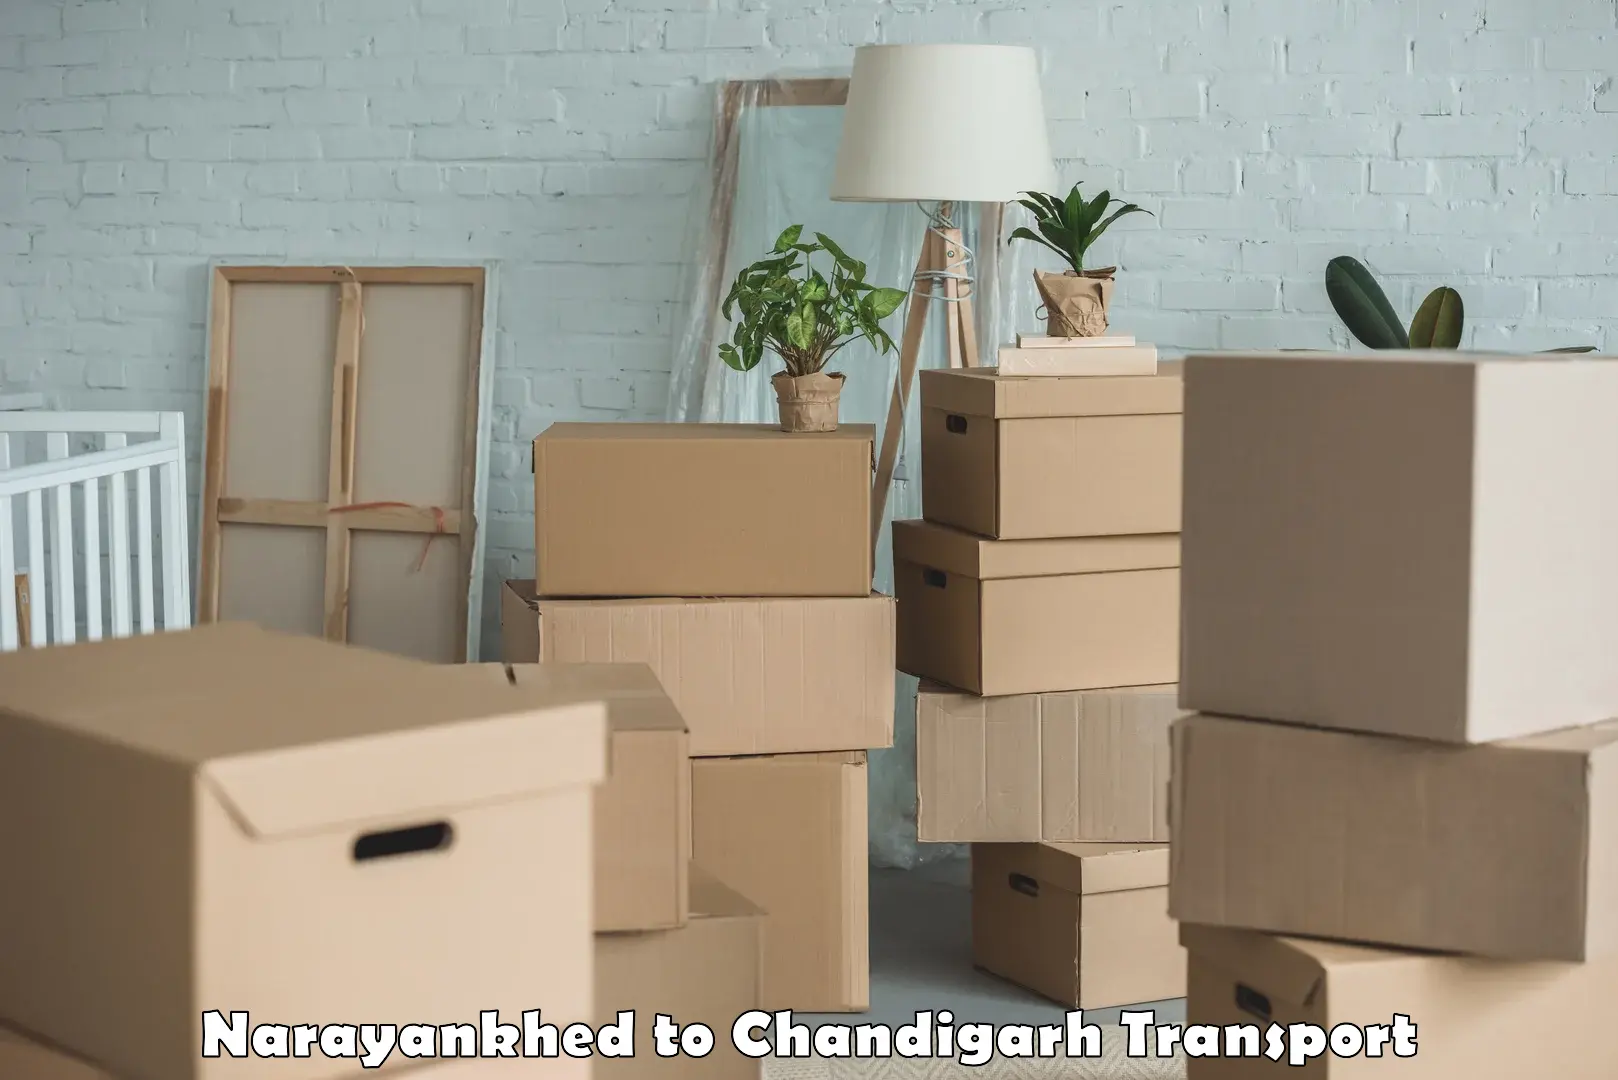 India truck logistics services Narayankhed to Chandigarh